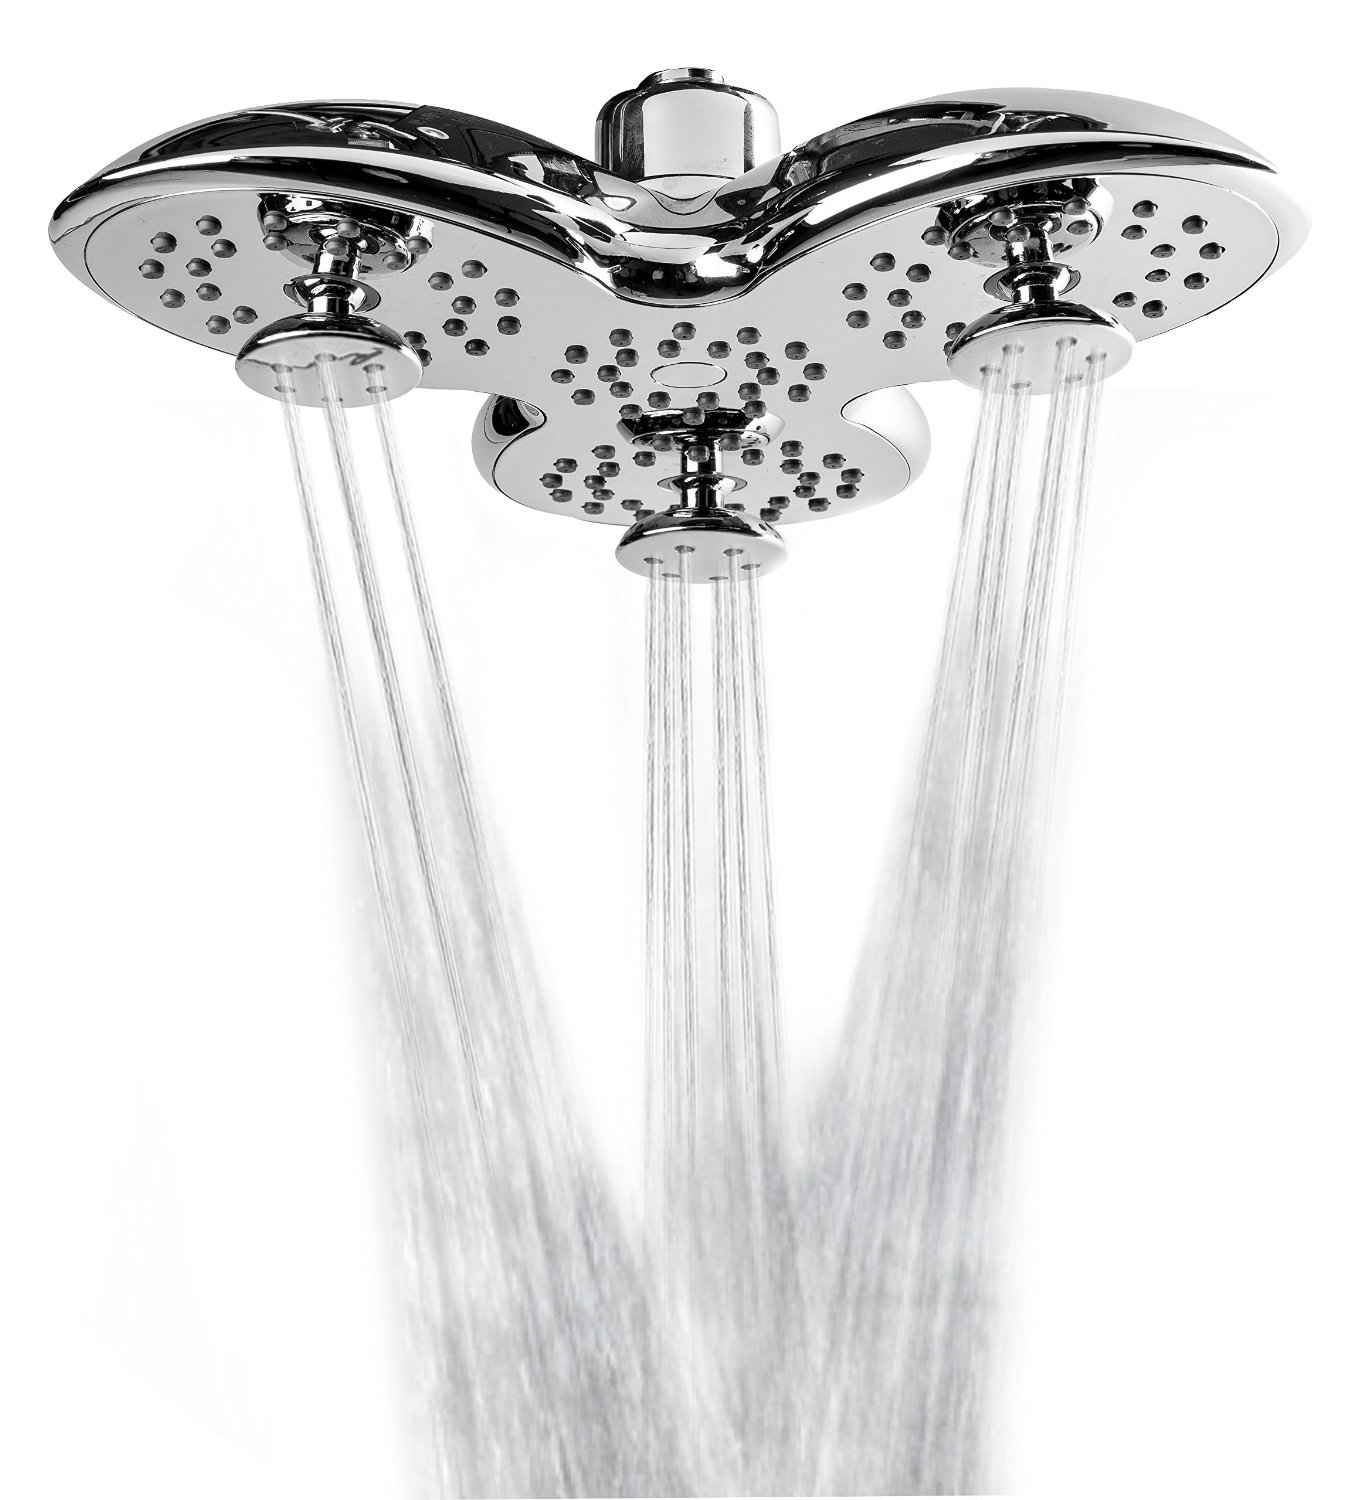 A-Flow™ Luxury Large 8 Showerhead with 3 Powerful Multi-Directional Massaging Water Jets